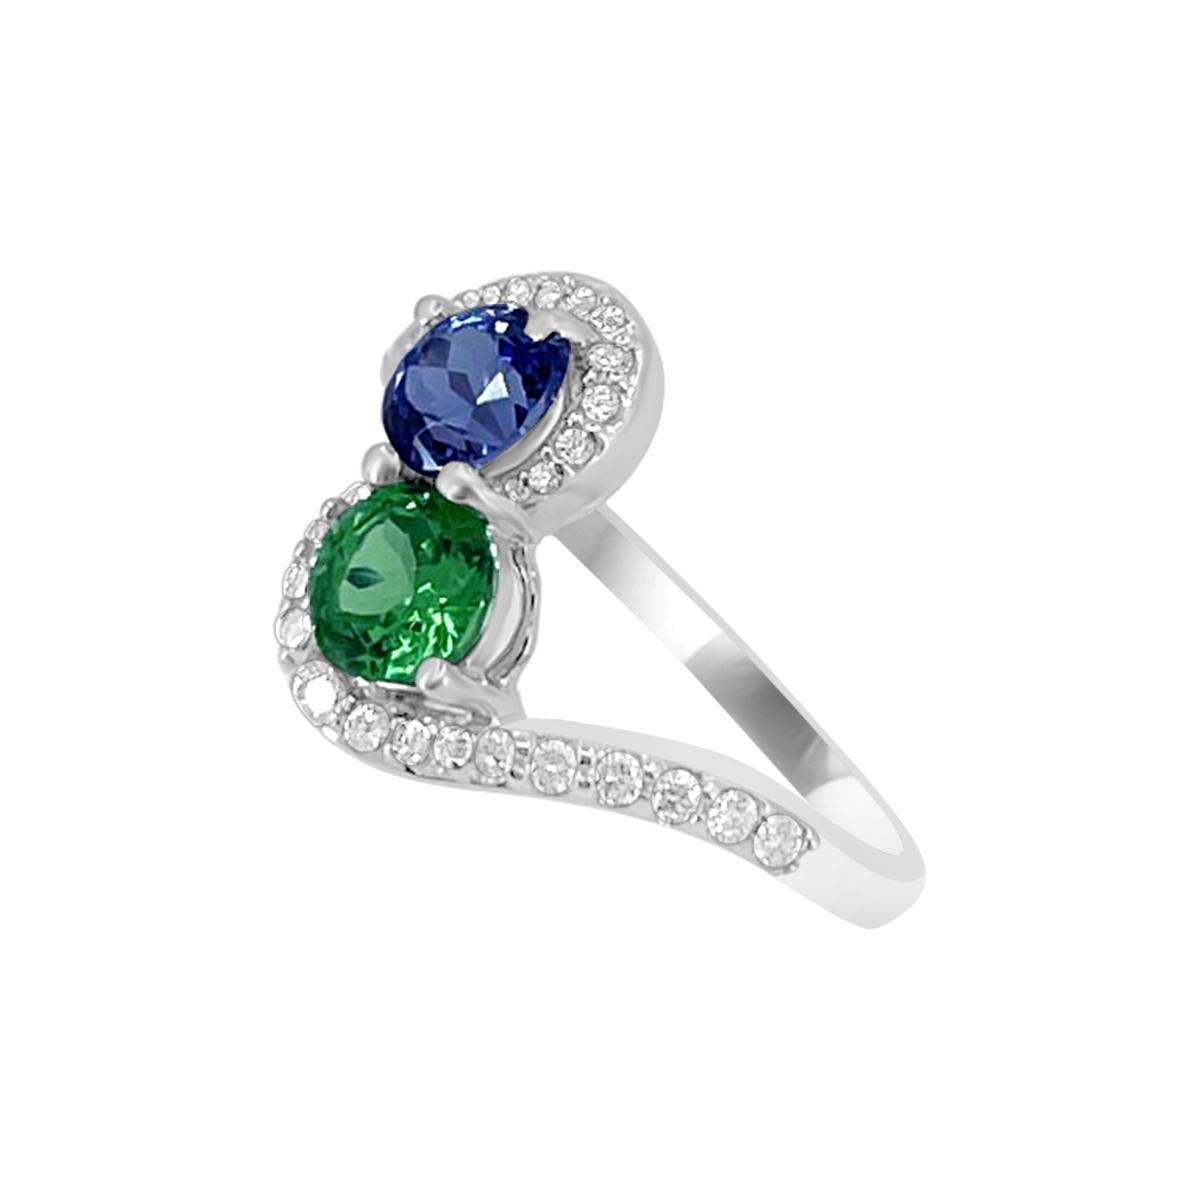 This Attractive Piece Of Jewelry With Two Center Stone Of 5mm Tanzanite And Emerald Sits Atop With Pave Set Diamonds Band To Embrace The Larger Stones. This Design Is Truly Unique And Luxurious Made Of 14K White Gold. Its A Timeless Look That Will